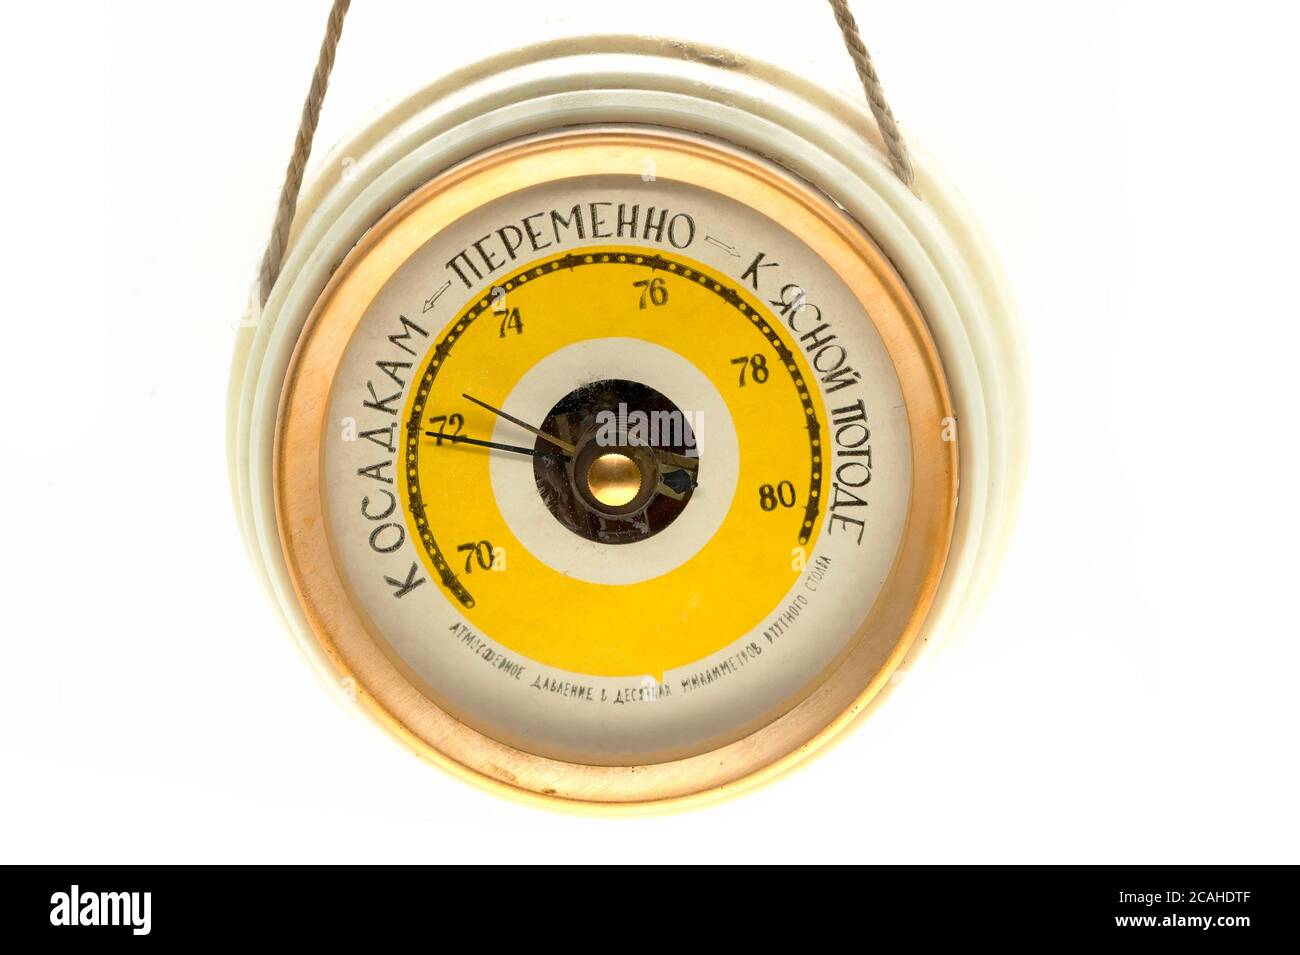 Unbranded vintage barometer, English translation of the text on the top is Rain, Change and Fair. Bottom one is Atmospheric pressure in tens of mmHg Stock Photo